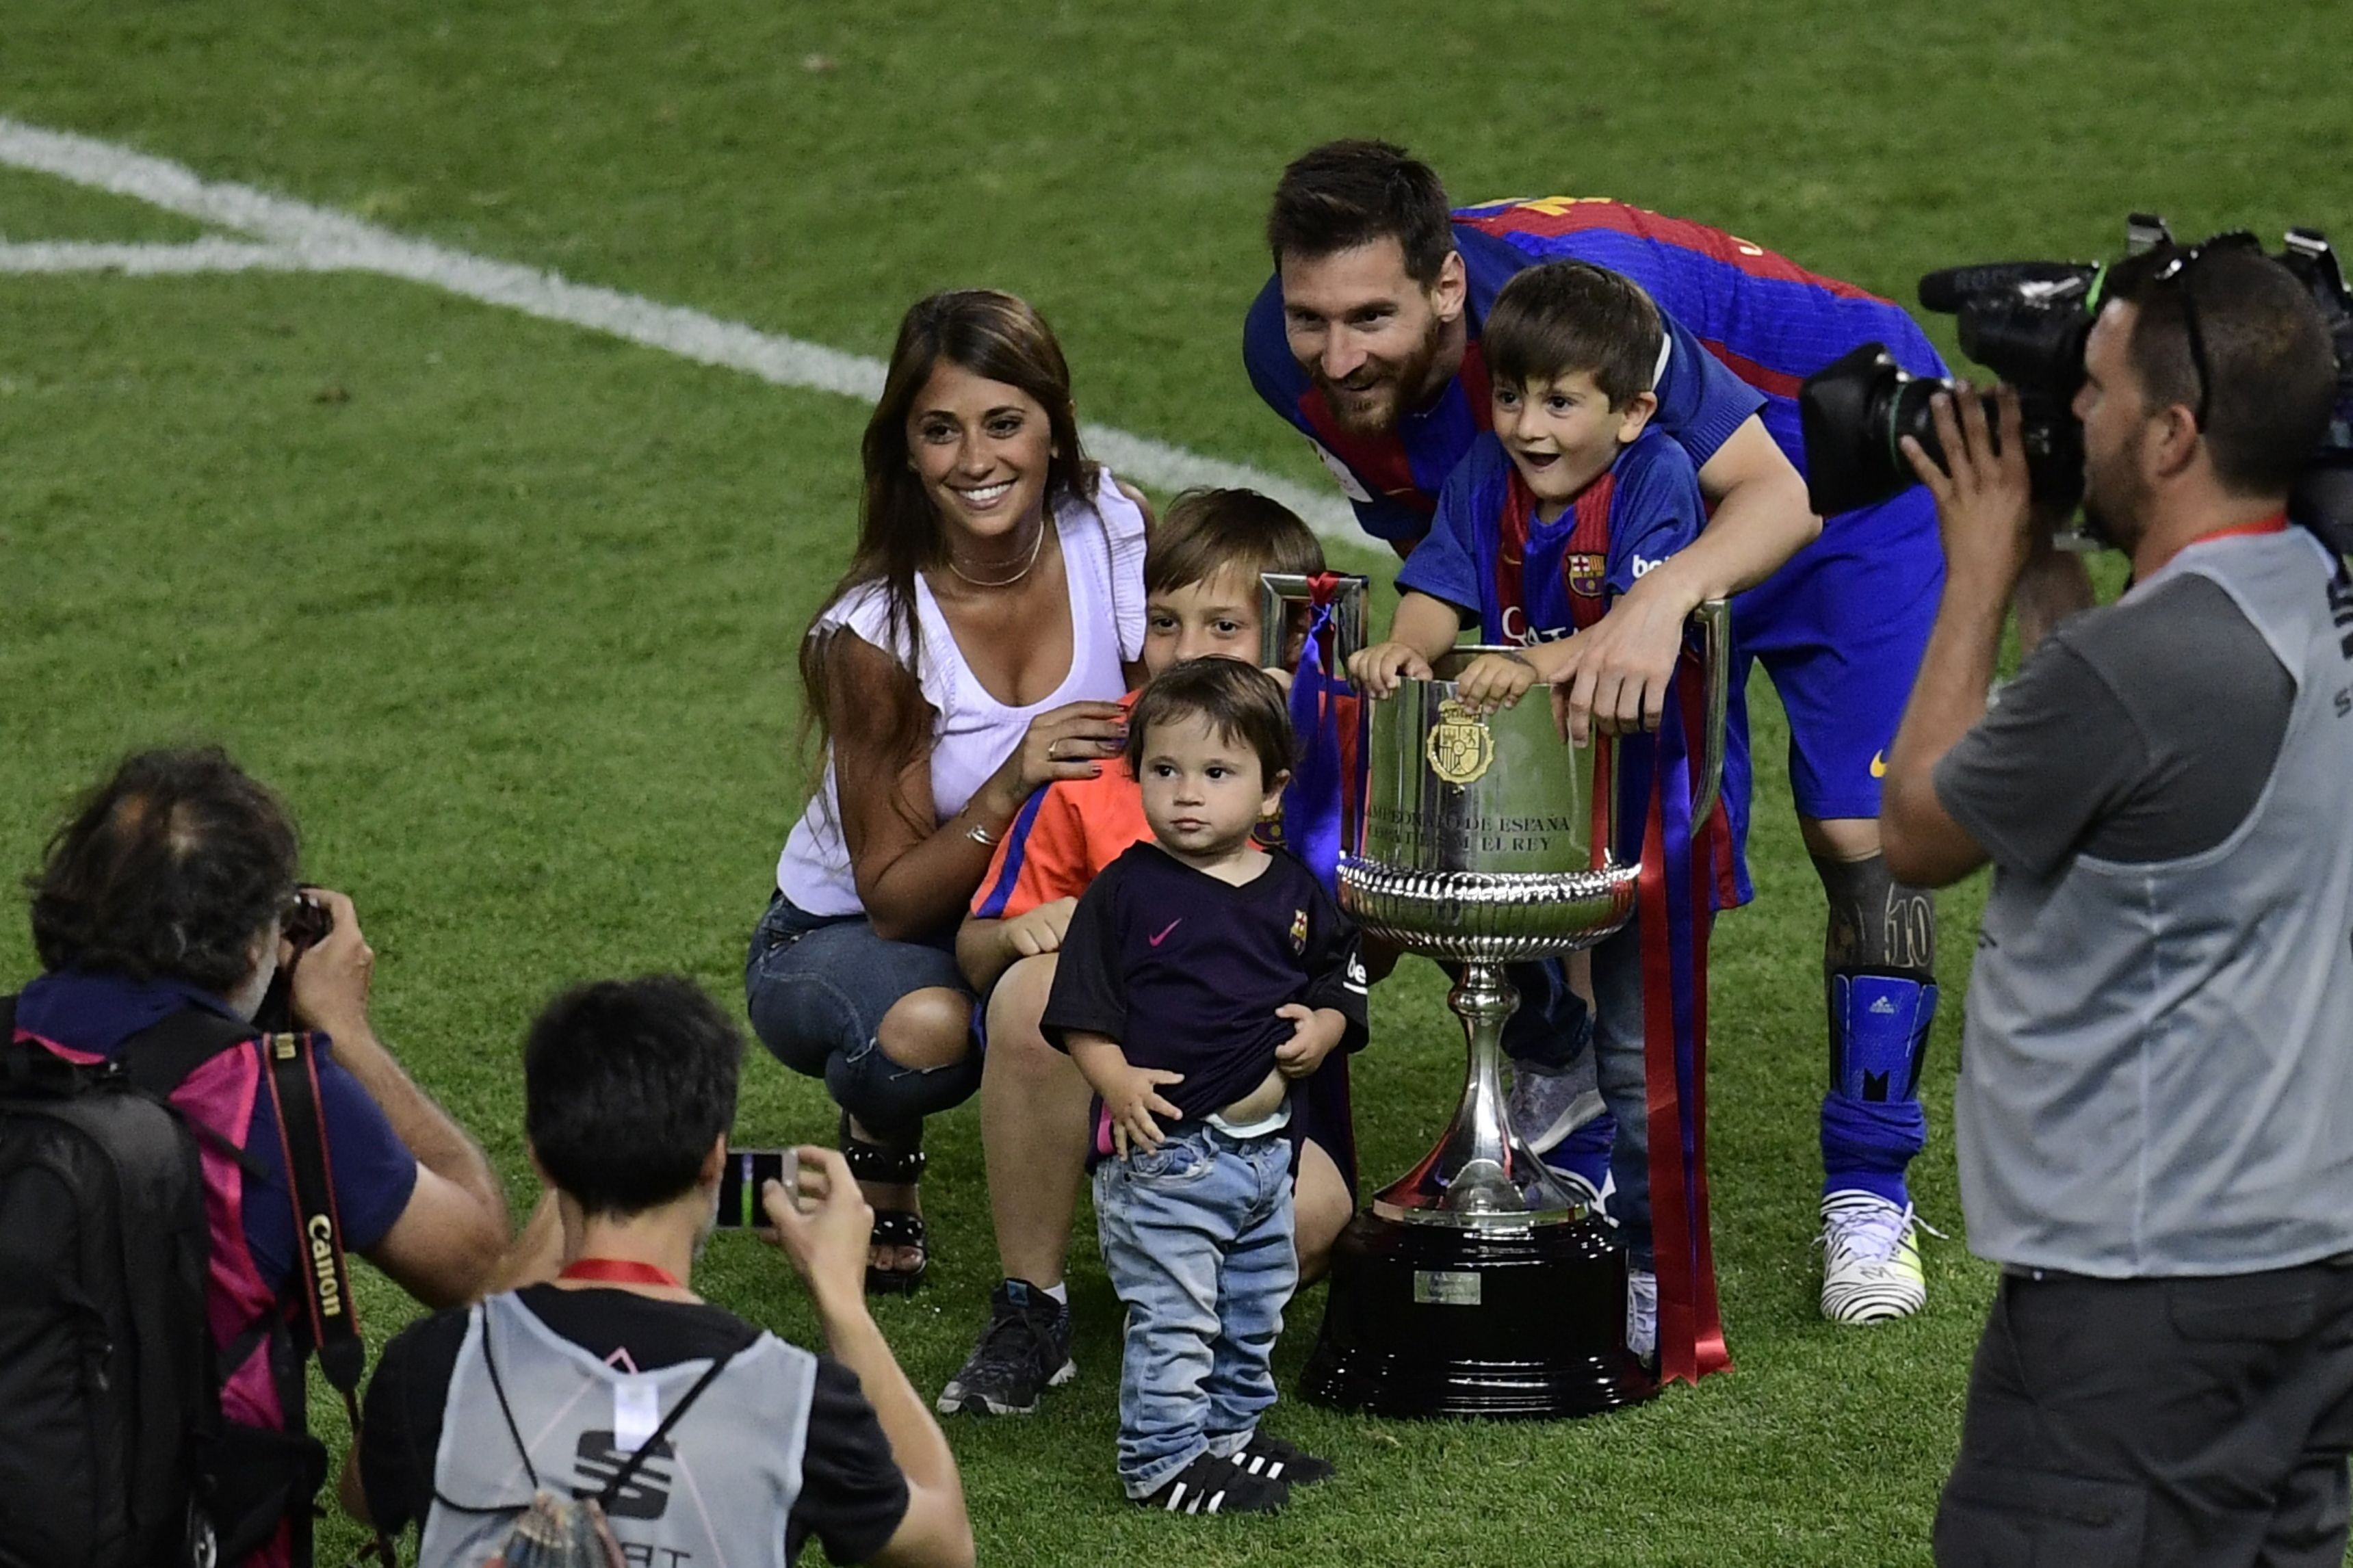 Barcelona's Argentinian forward Lionel Messi (C), his wife Antonella Roccuzzo and sons pose with the trophy at the end of the Spanish Copa del Rey (King's Cup) final football match FC Barcelona vs Deportivo Alaves at the Vicente Calderon stadium in Madrid on May 27, 2017. Barcelona won 3-1. / AFP PHOTO / JAVIER SORIANO